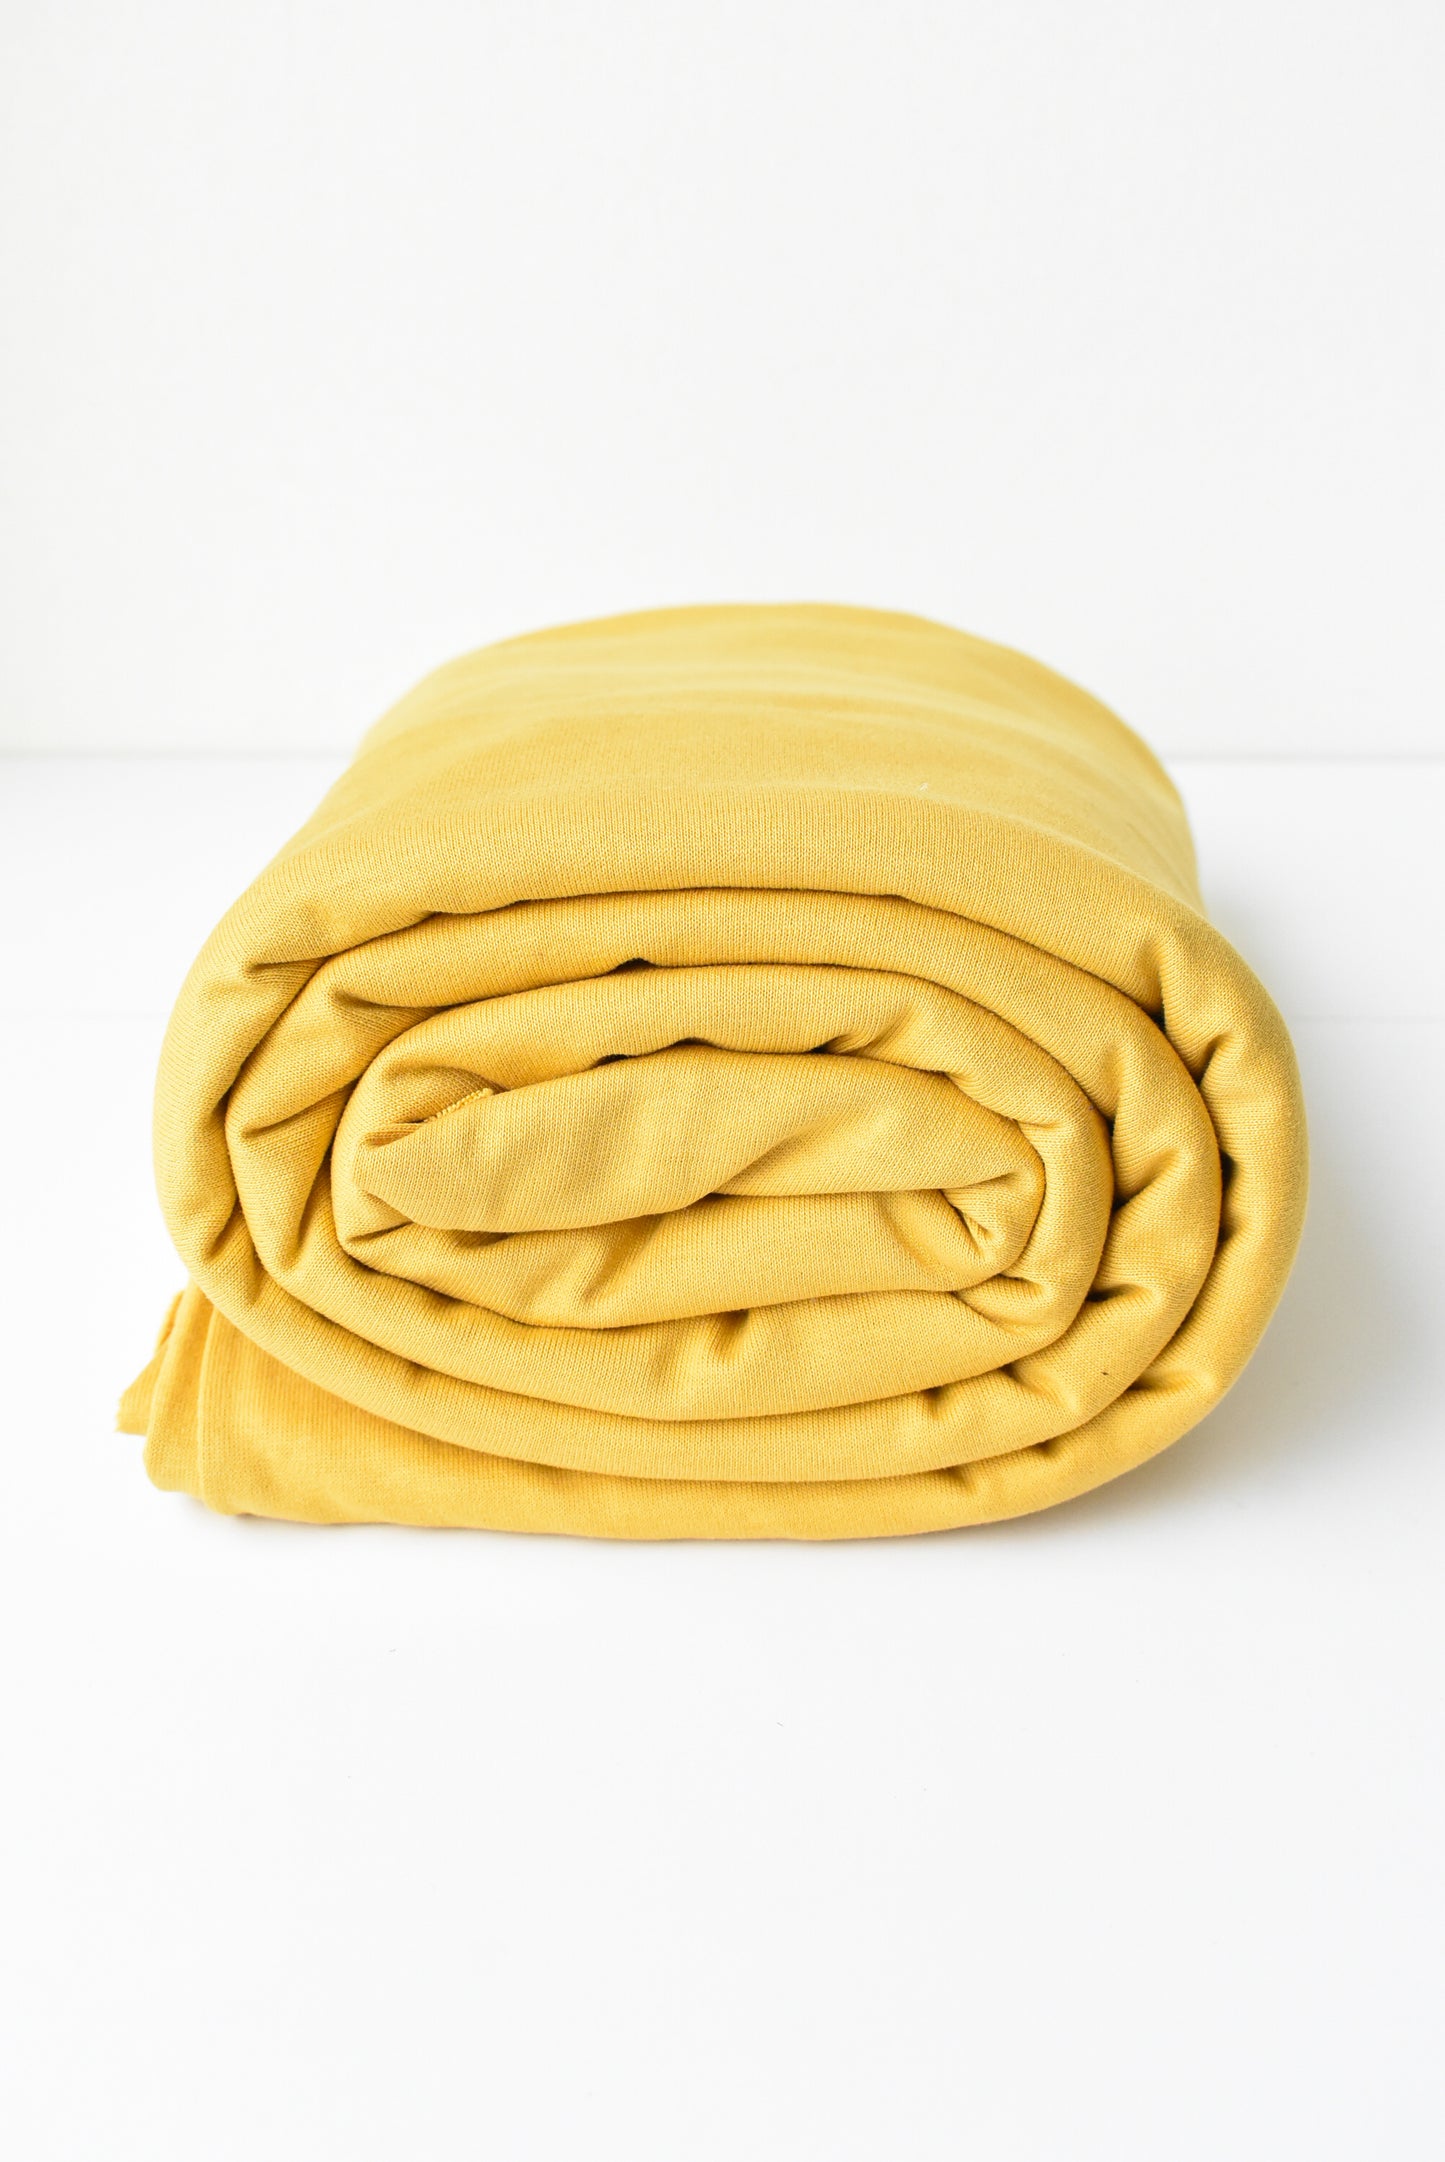 Roll of golden yellow fabric